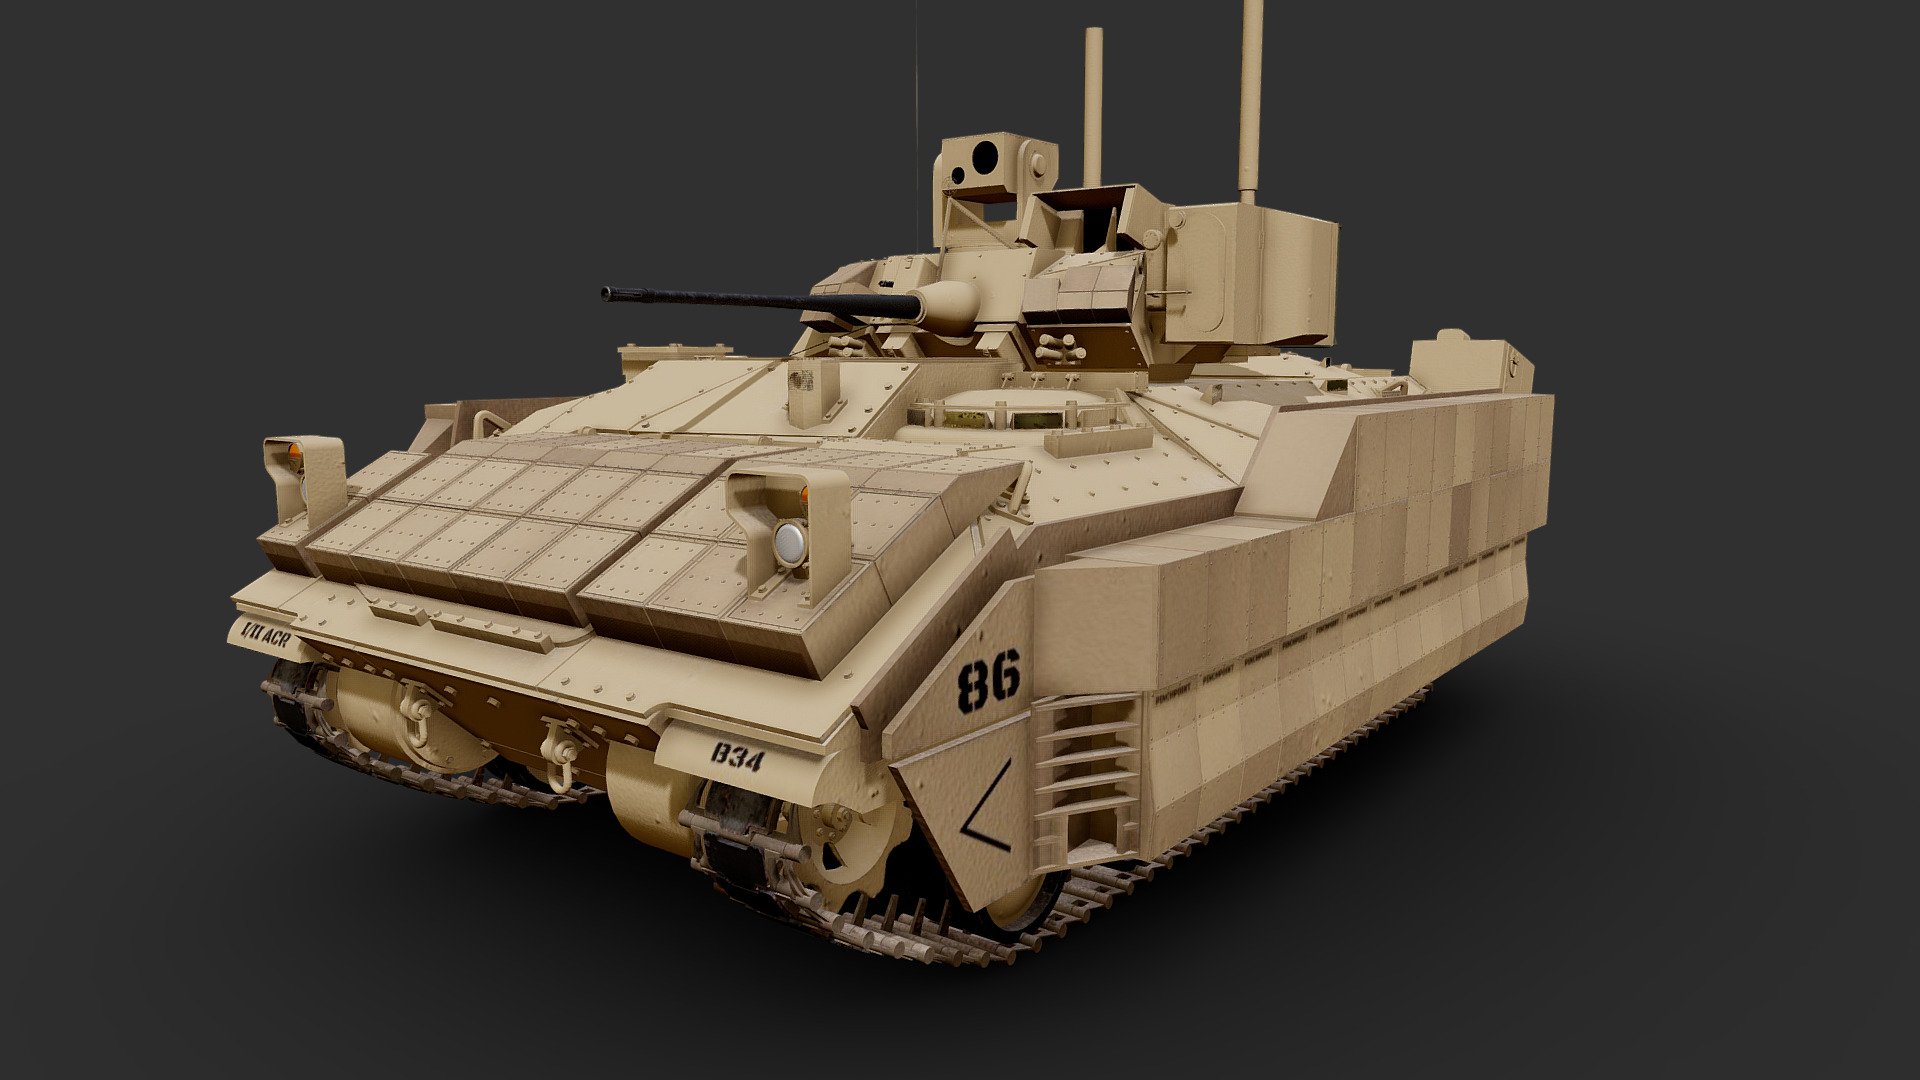 The Bradley Fighting Vehicle (BFV) is a tracked fighting vehicle platform of the United States manufactured by BAE Systems Land &amp; Armaments, formerly United Defense. It is named after U.S. General Omar Bradley.

The Bradley is designed to transport infantry or scouts with armor protection, while providing covering fire to suppress enemy troops and armored vehicles. The several Bradley variants include the M2 Bradley infantry fighting vehicle and the M3 Bradley cavalry fighting vehicle. The M2 holds a crew of three (a commander, a gunner, and a driver) along with six fully equipped soldiers. The M3 mainly conducts scout missions and carries two scout troopers in addition to the regular crew of three, with space for additional BGM-71 TOW missiles.

In 2014, the U.S. Army selected BAE Systems Armored Multi-Purpose Vehicle (AMPV) proposal of a turretless variant of the BFV to replace over 2800 M113s in service 3d model